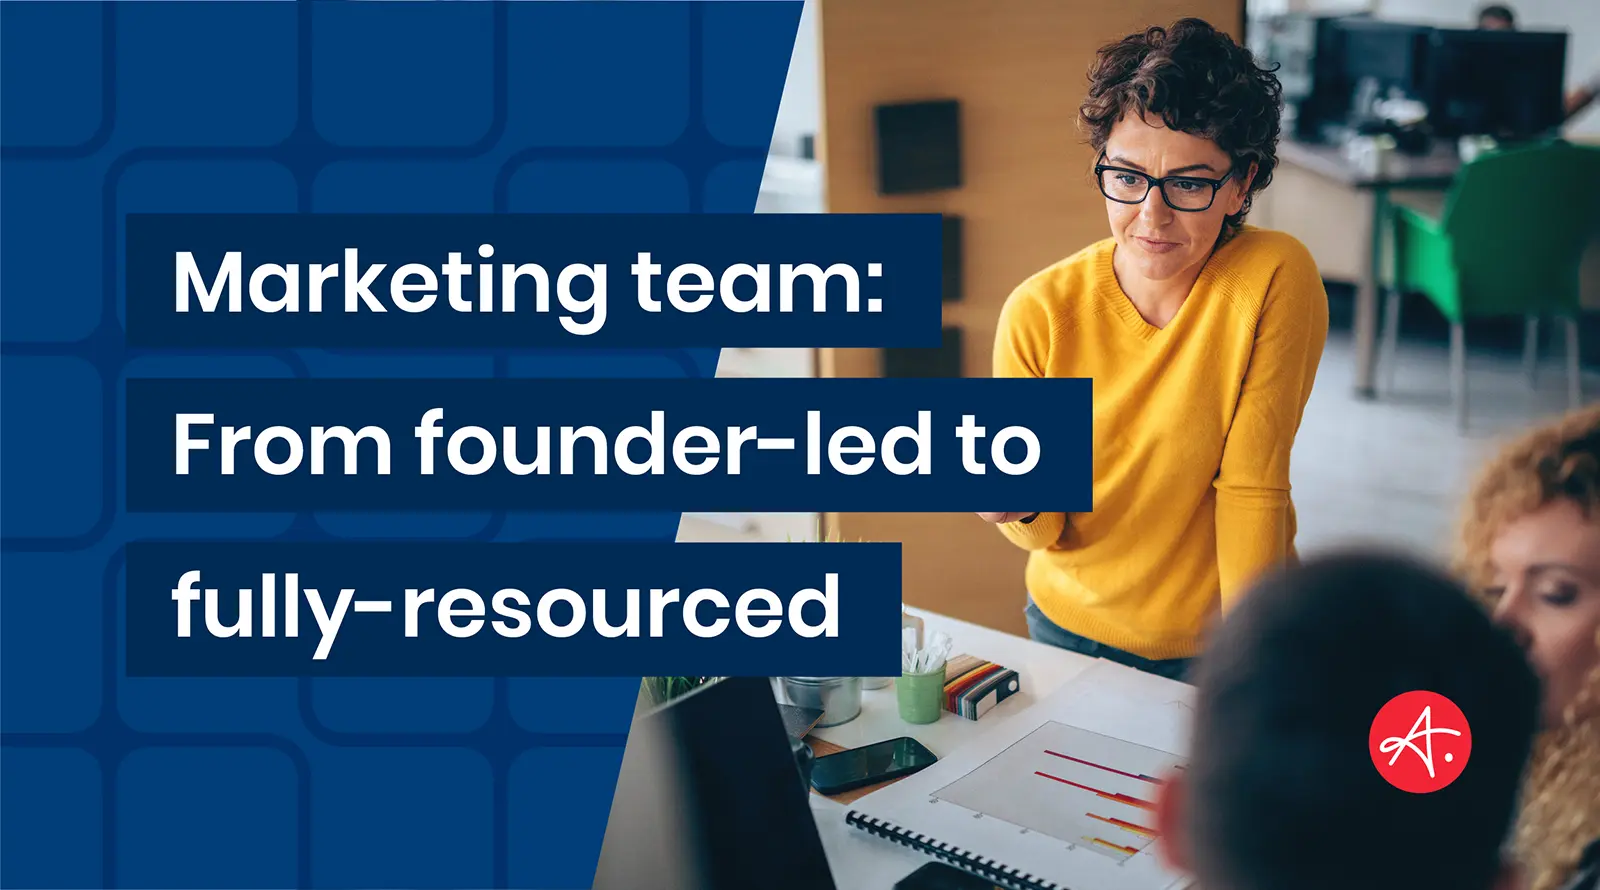 Marketing team: From founder-led to fully-resourced